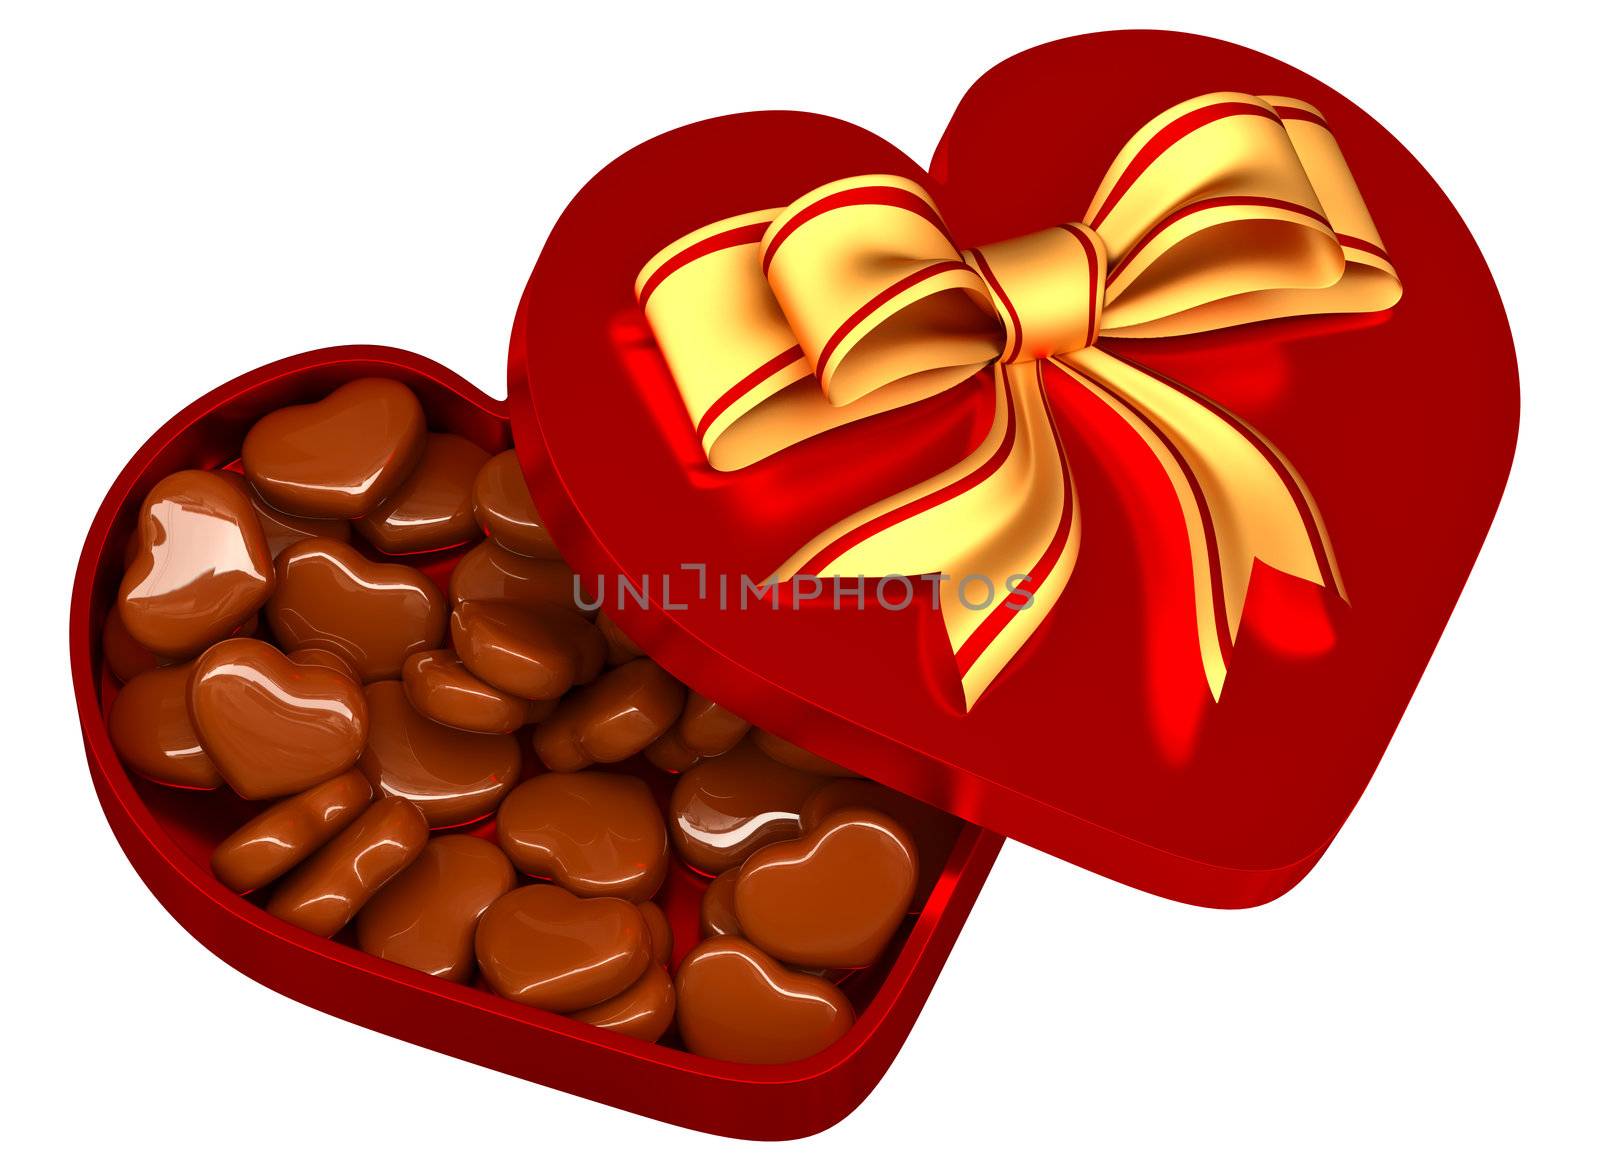 Allsorts milk chocolate in the form of heart in a red box with a golden bow as a sweet gift for perfect Valentine's Day.